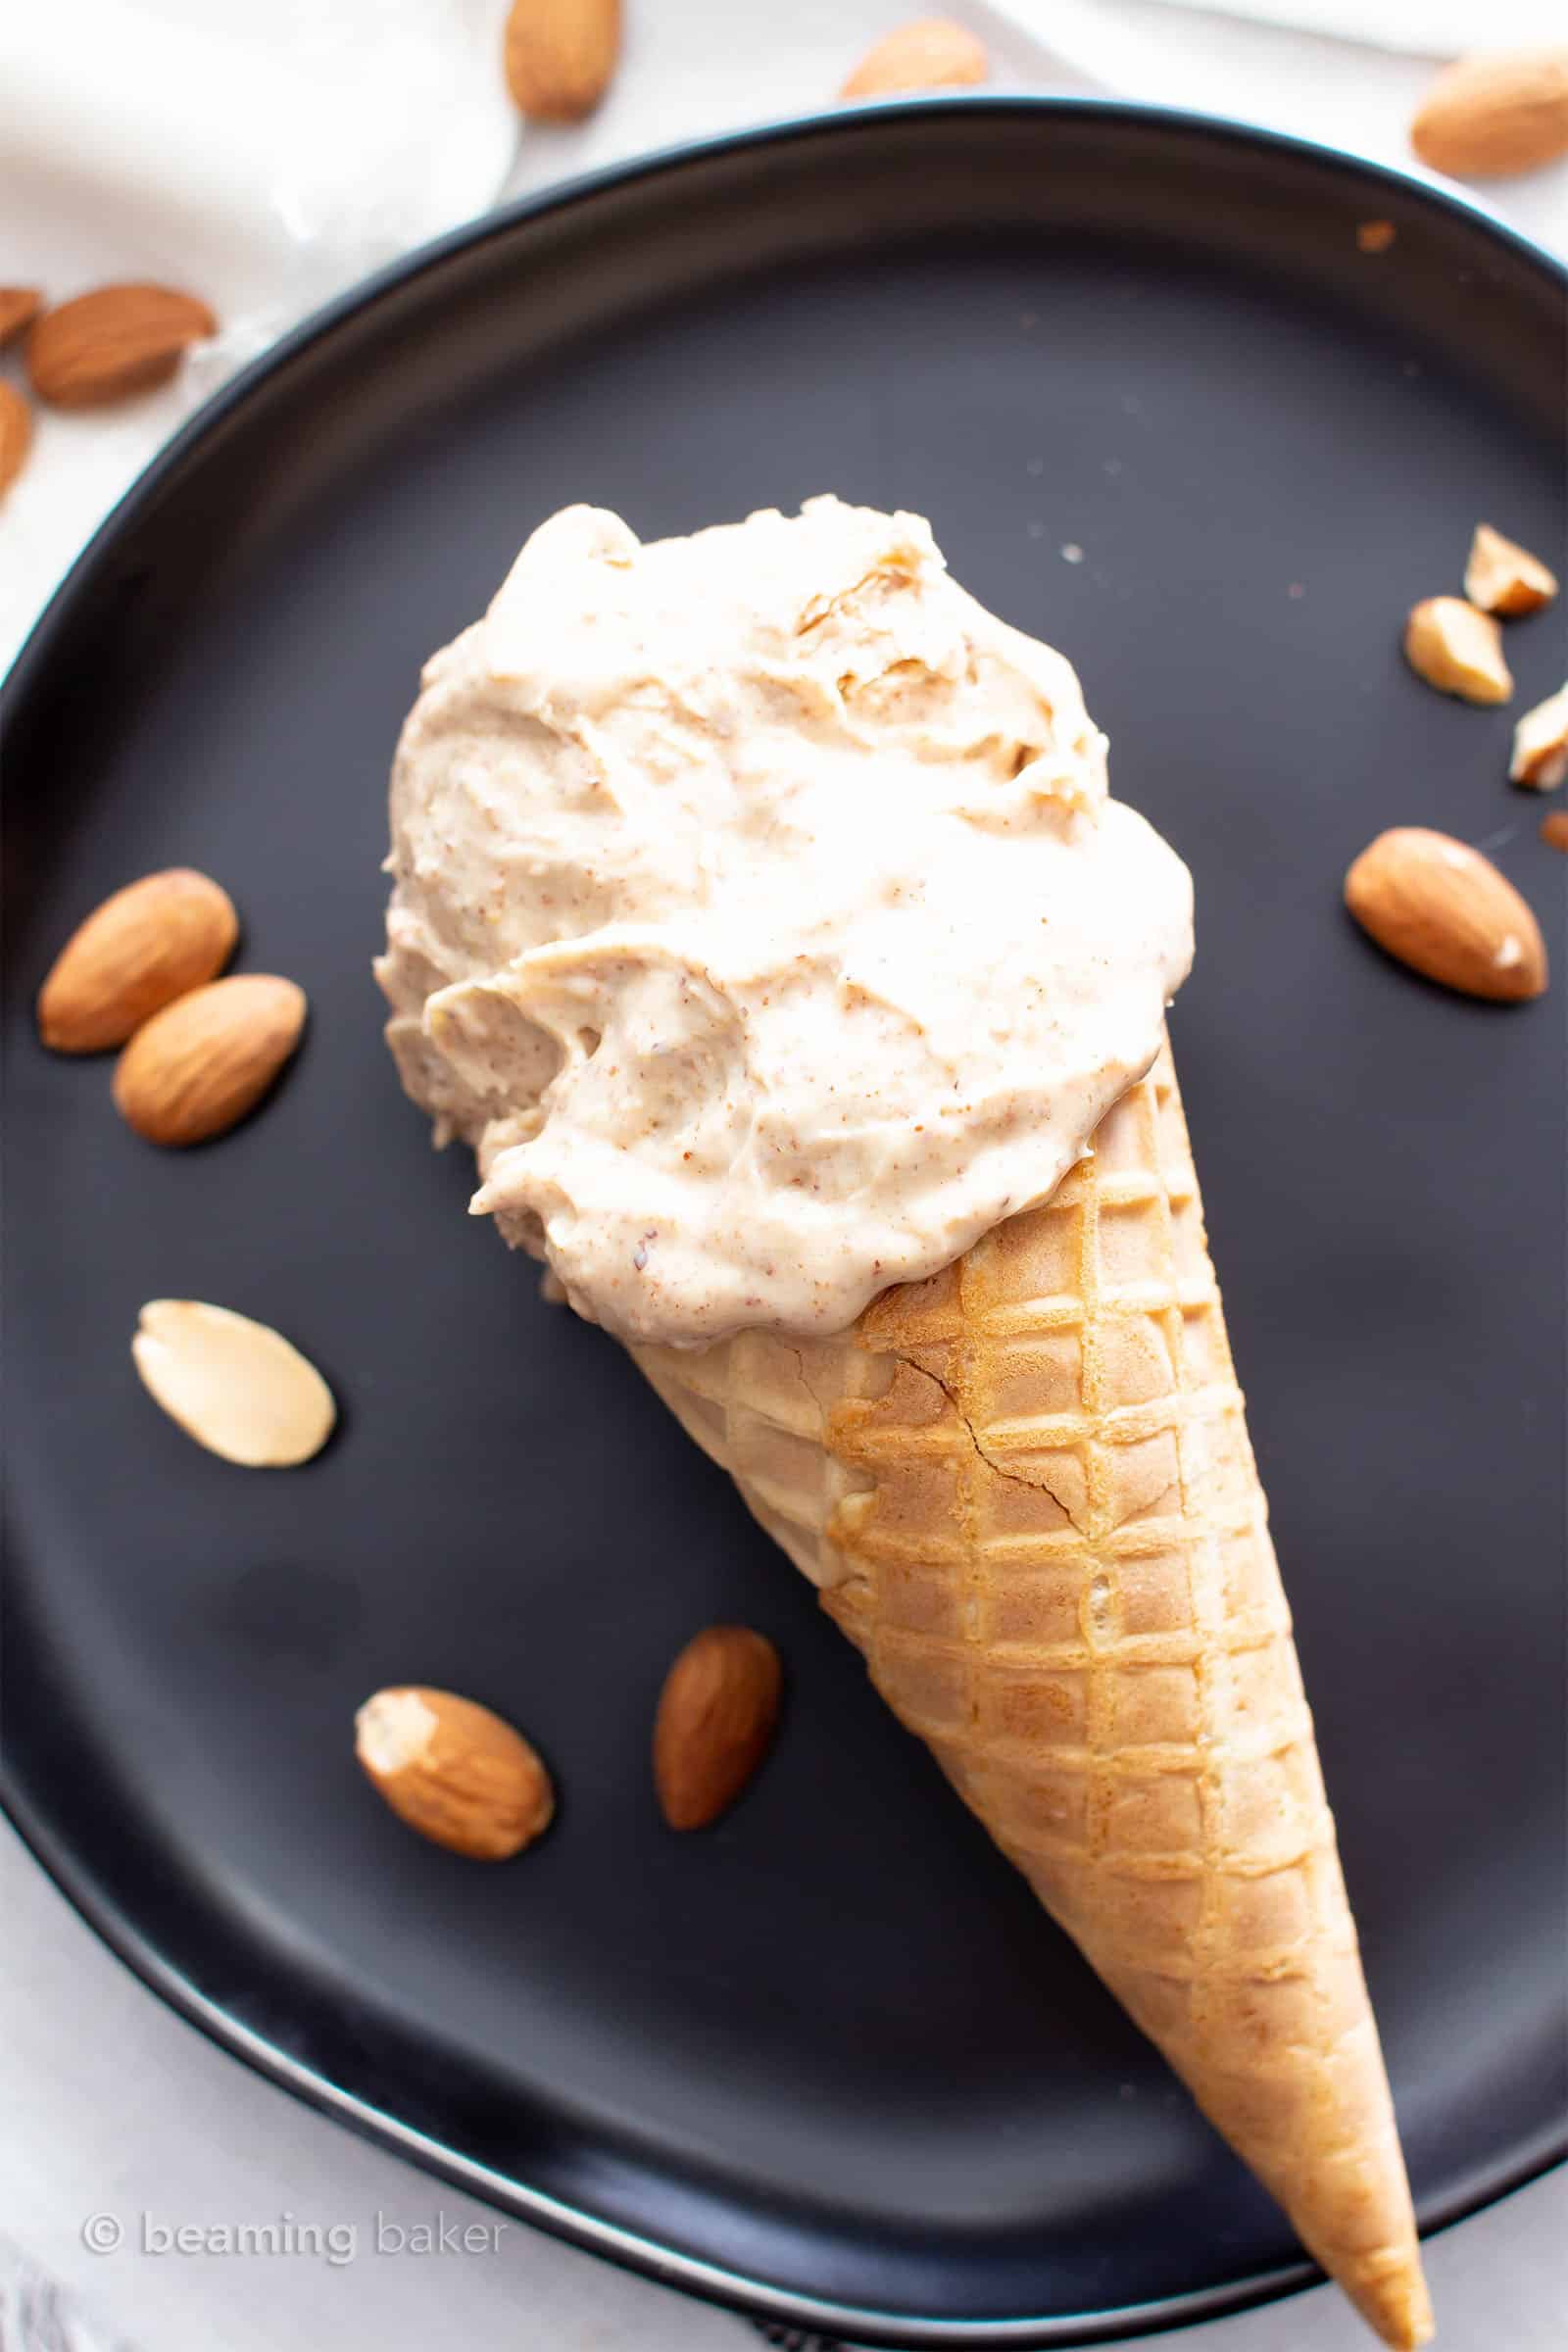 4 Ingredient Almond Butter Paleo Ice Cream: just 5 mins of prep & 4 ingredients for the creamiest almond butter paleo ice cream! No Churn, Vegan, Keto, Dairy Free. #Paleo #AlmondButter #IceCream | Recipe at BeamingBaker.com 